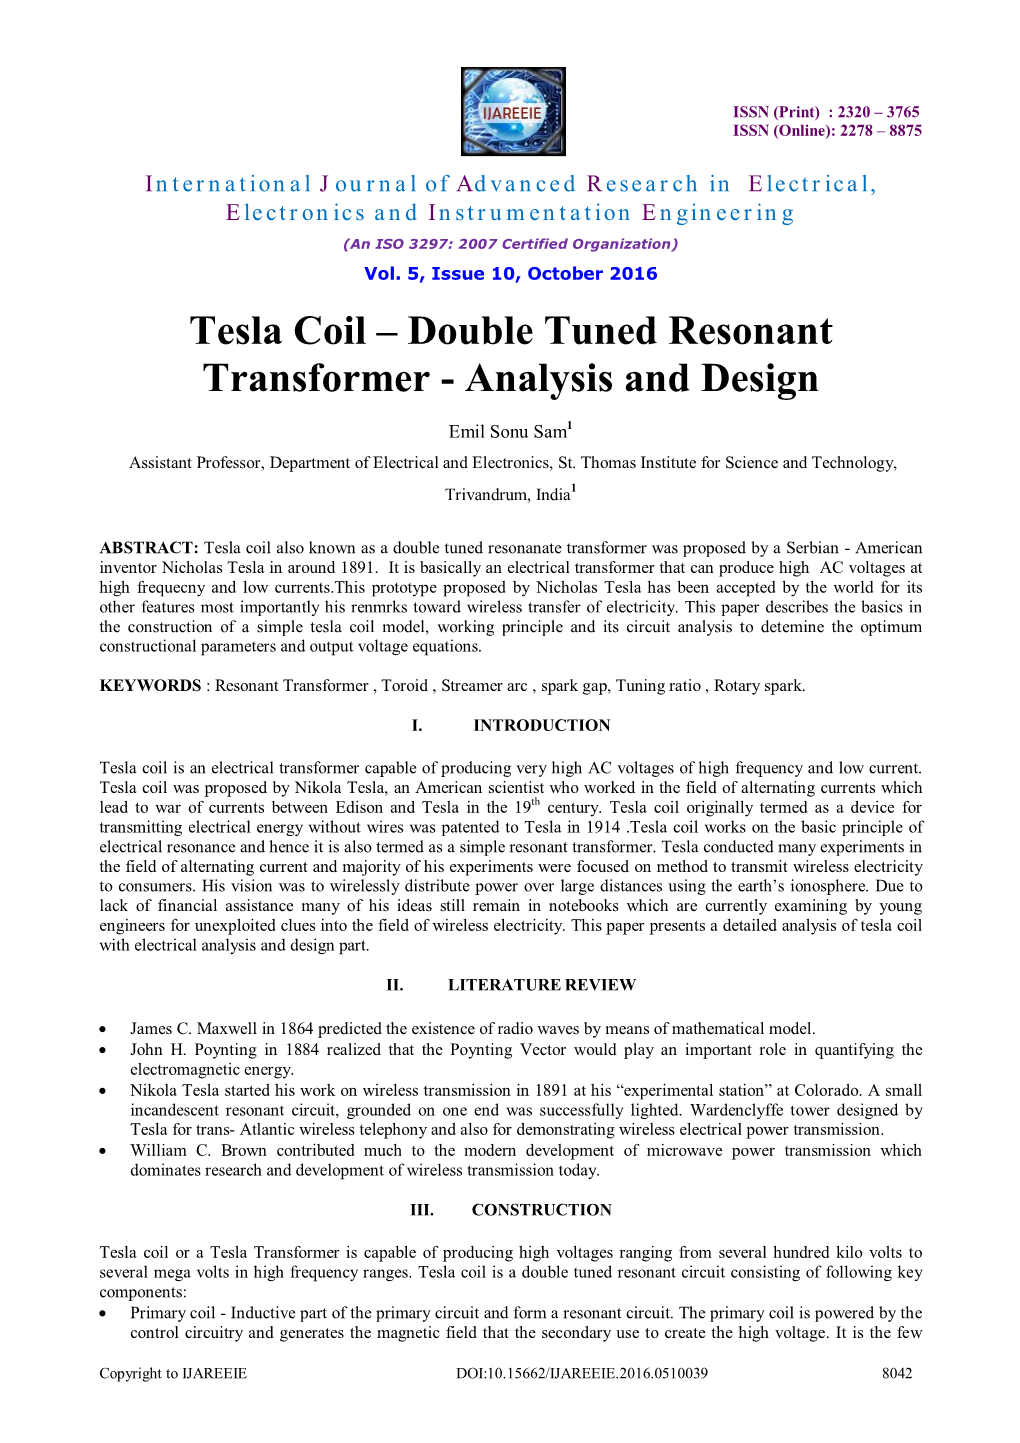 Tesla Coil – Double Tuned Resonant Transformer - Analysis and Design